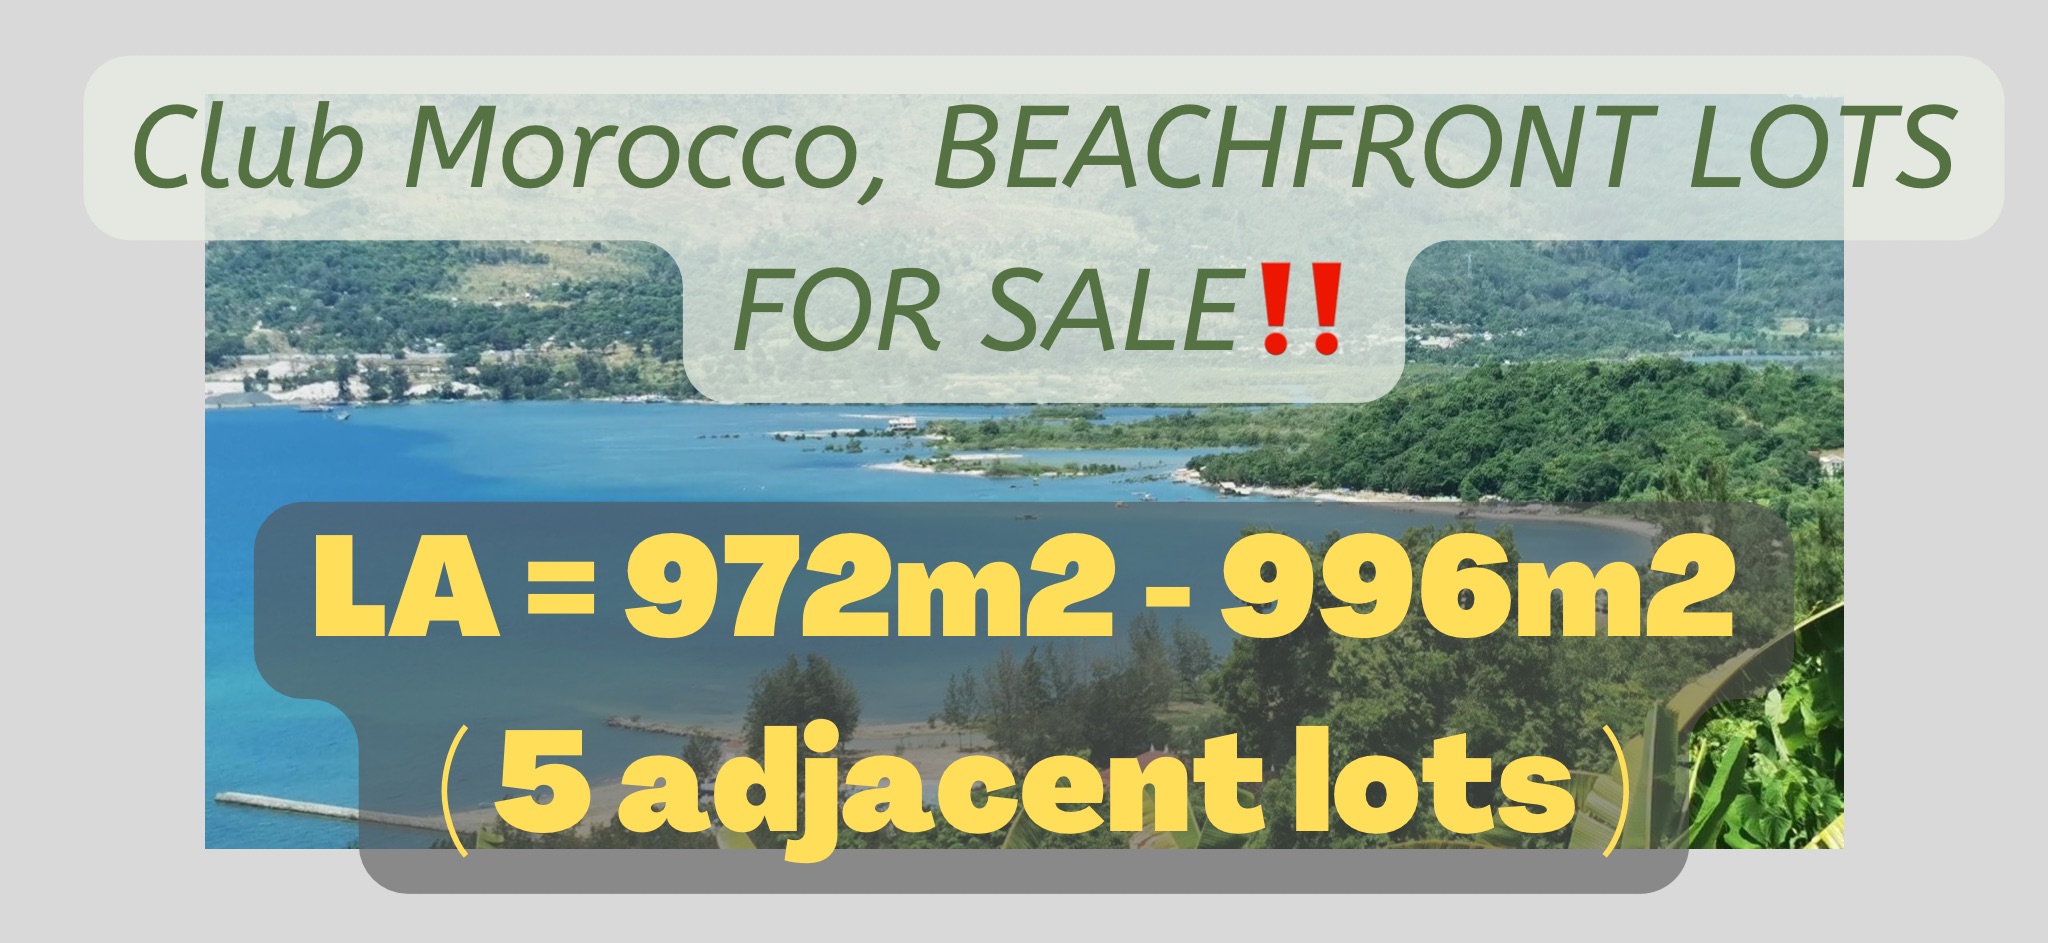 Club Morocco, BEACHFRONT LOTS FOR SALE‼️